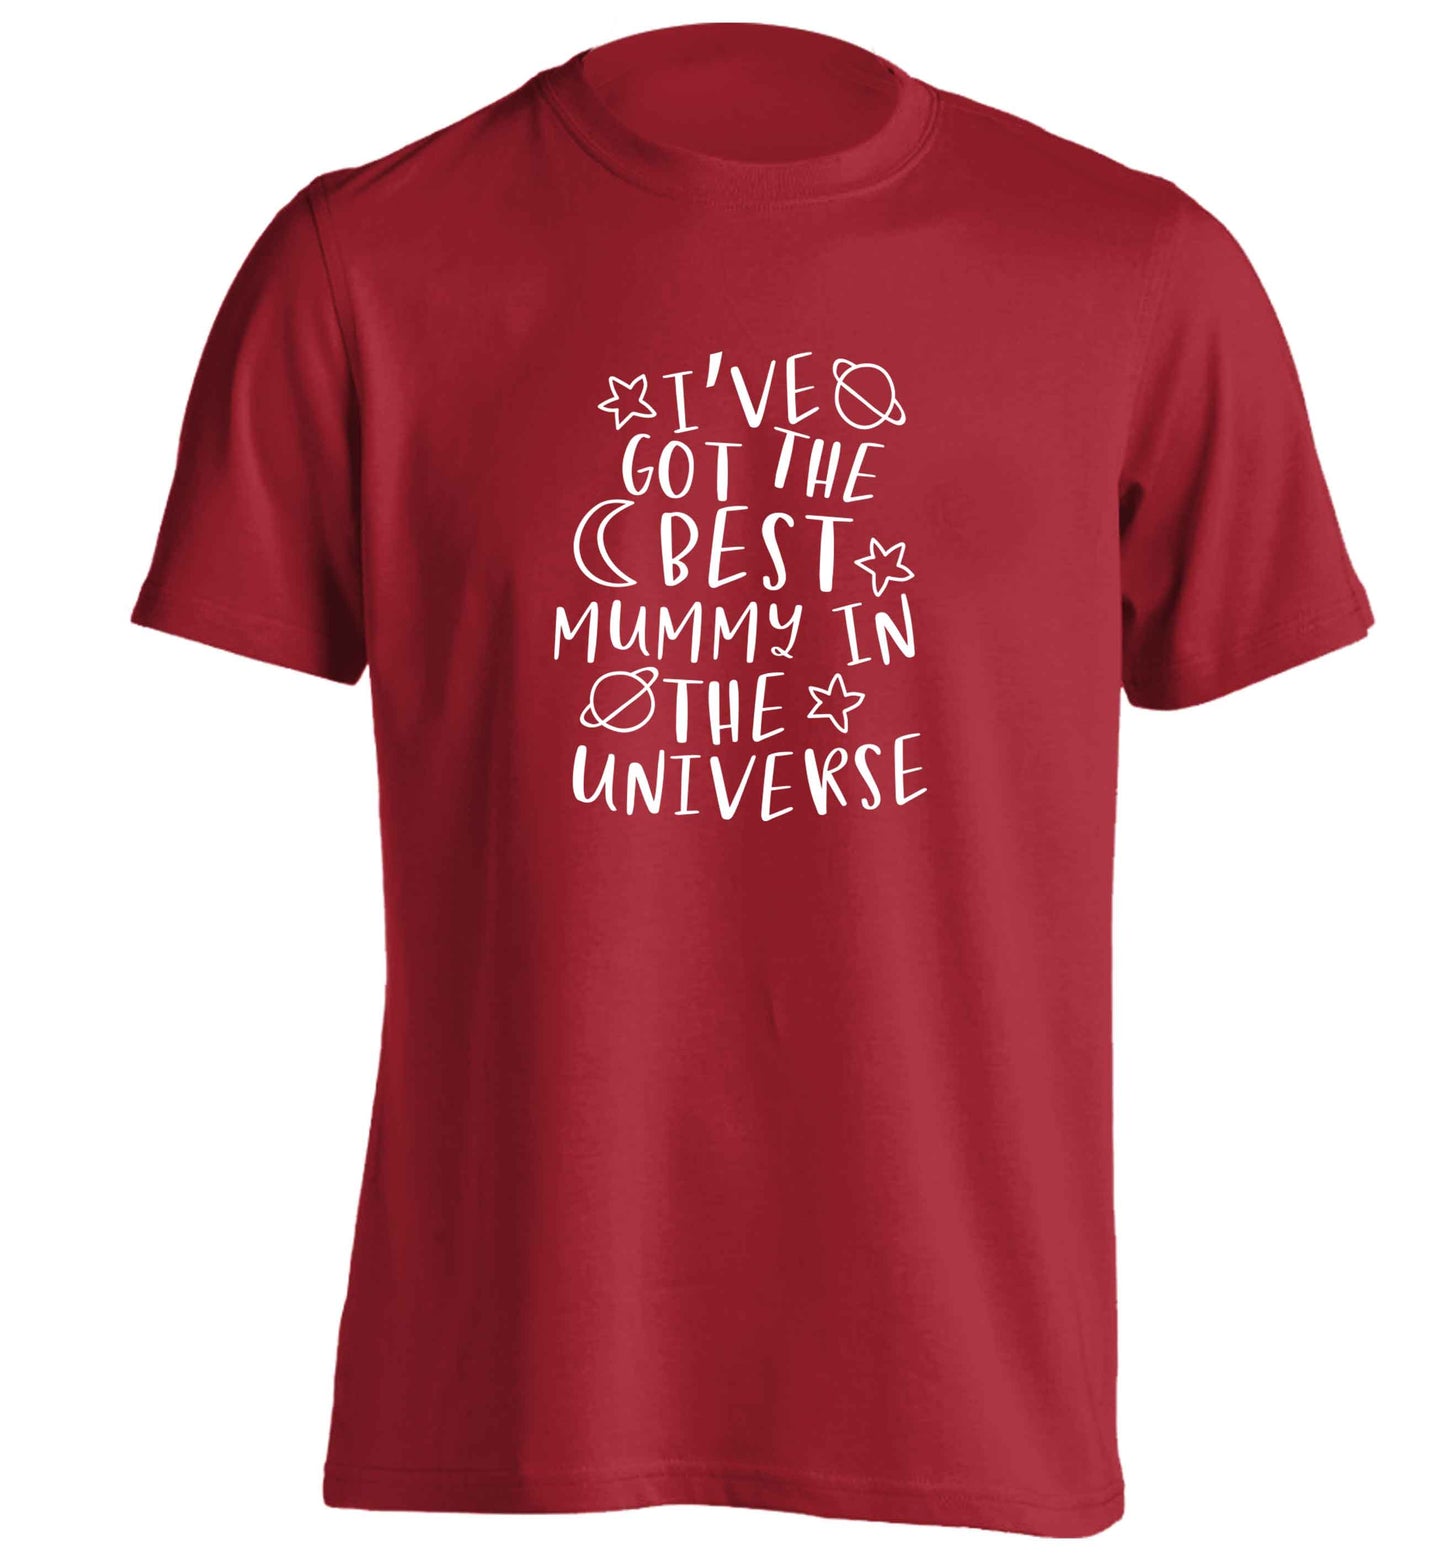 I've got the best mummy in the universe adults unisex red Tshirt 2XL